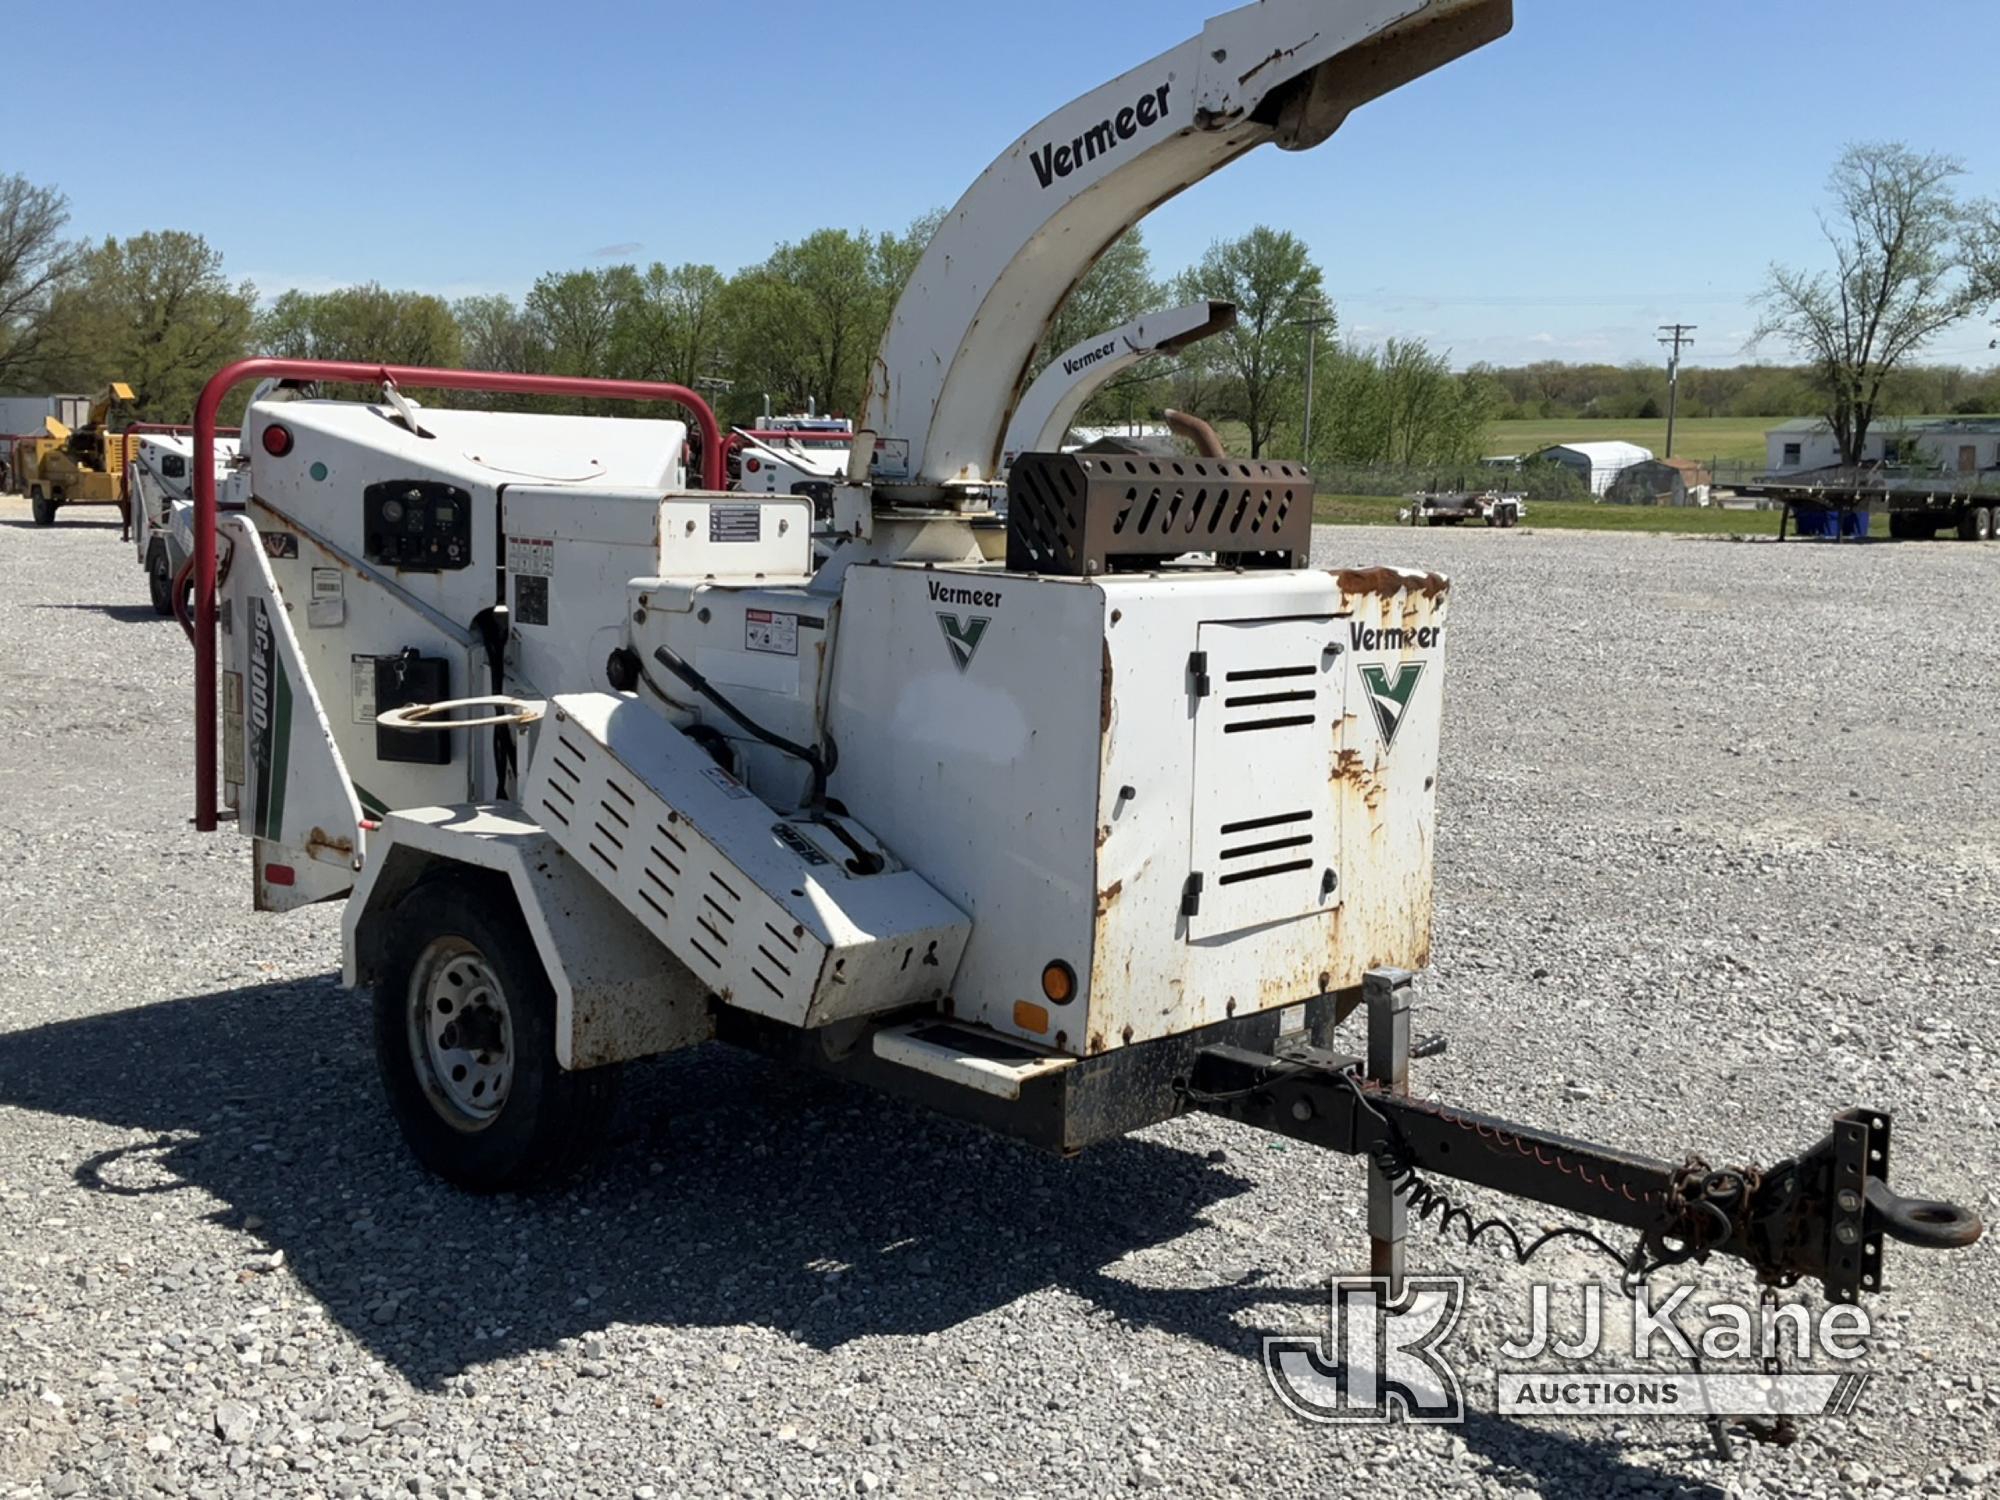 (Hawk Point, MO) 2015 Vermeer BC1000XL Chipper (12in Drum) No Title) (Runs & Operates) (Body Damage